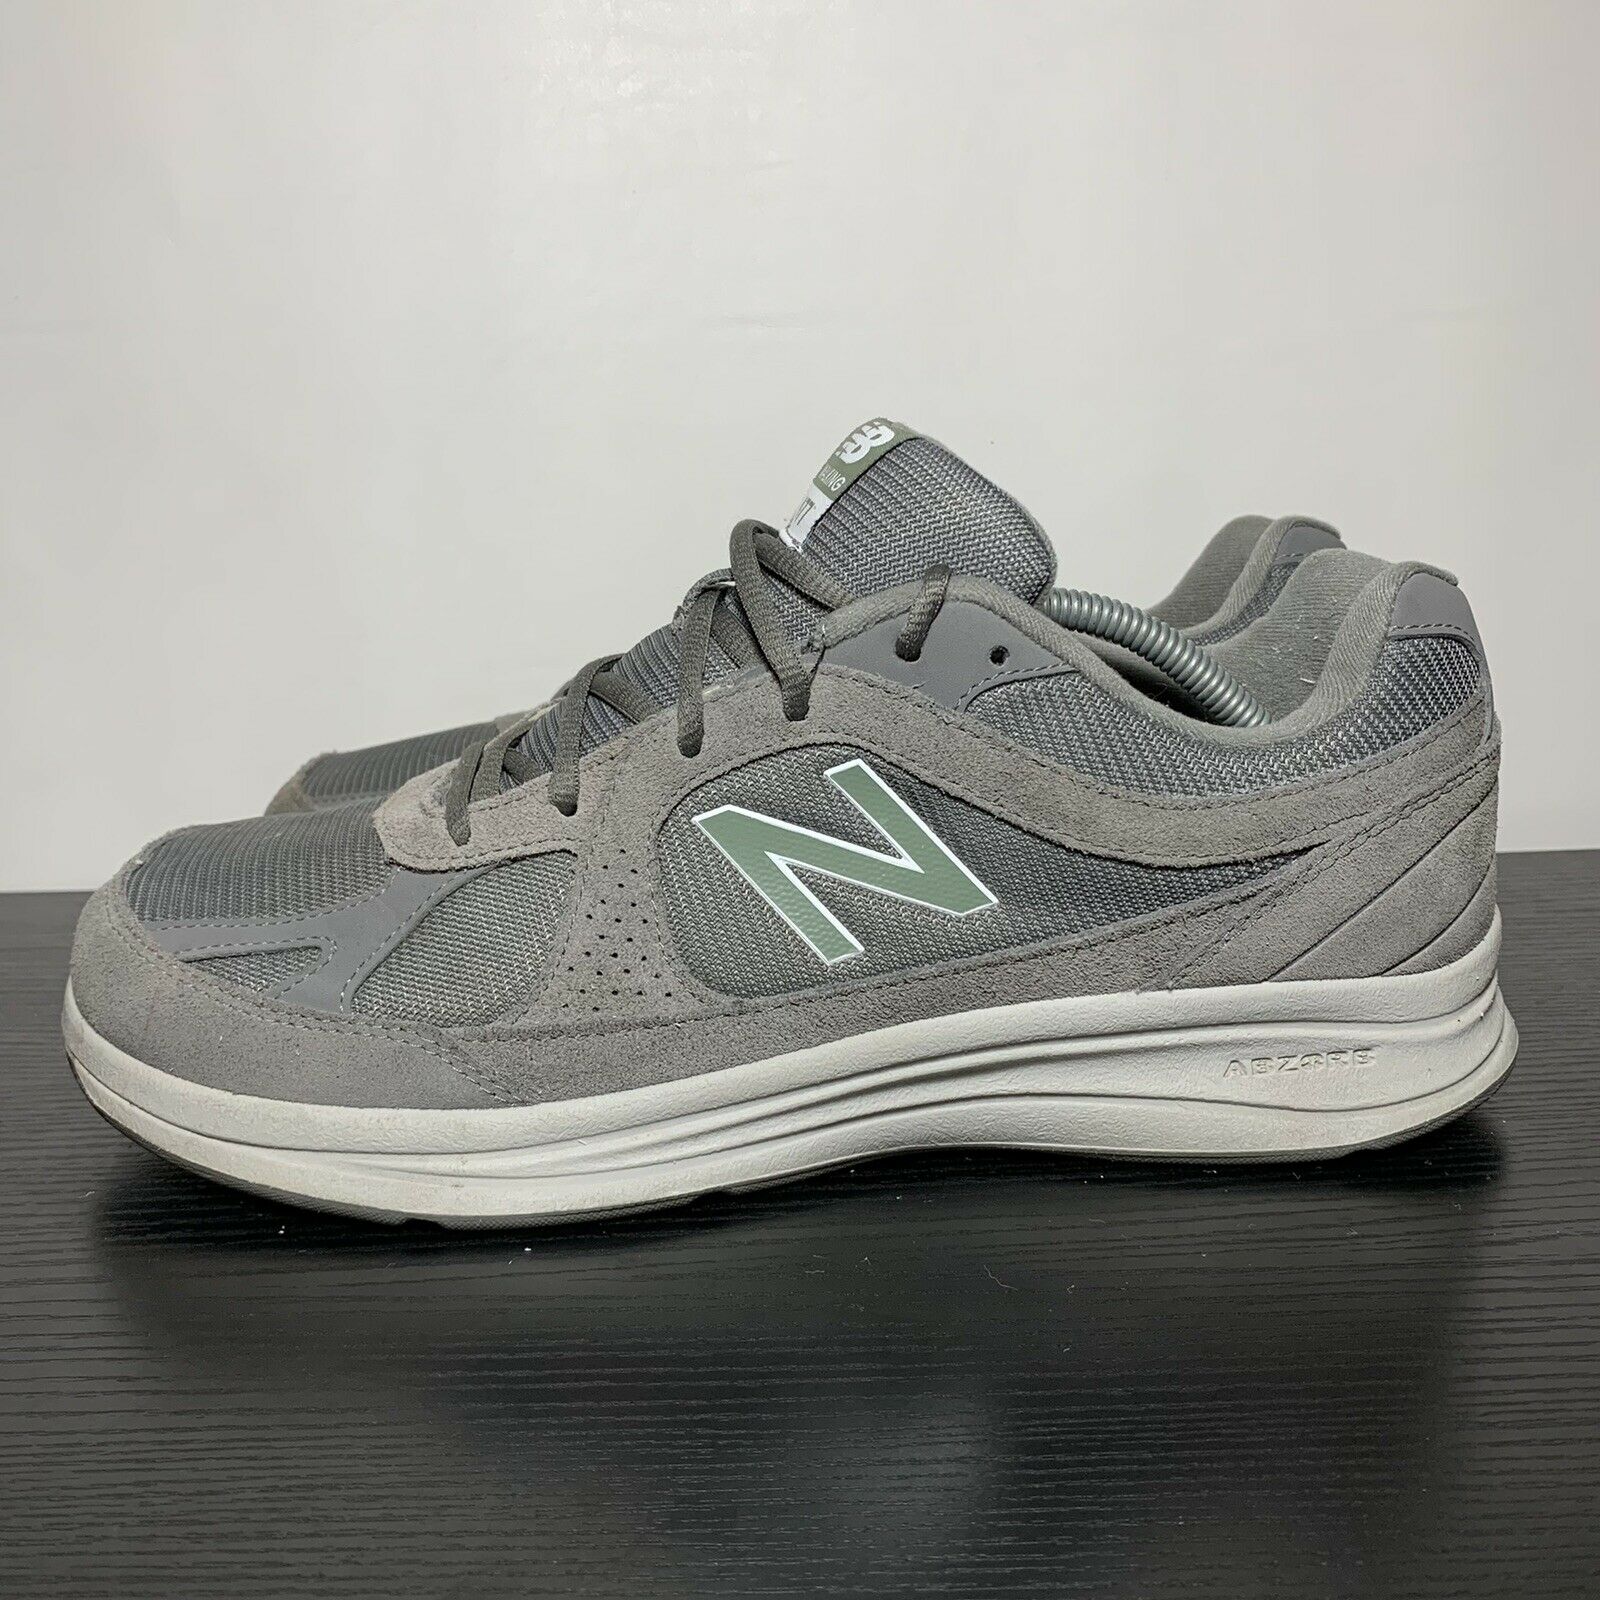 New Balance 877 Gray Suede Walking Shoes Sneaker Made In USA MW877GT Men Size 12